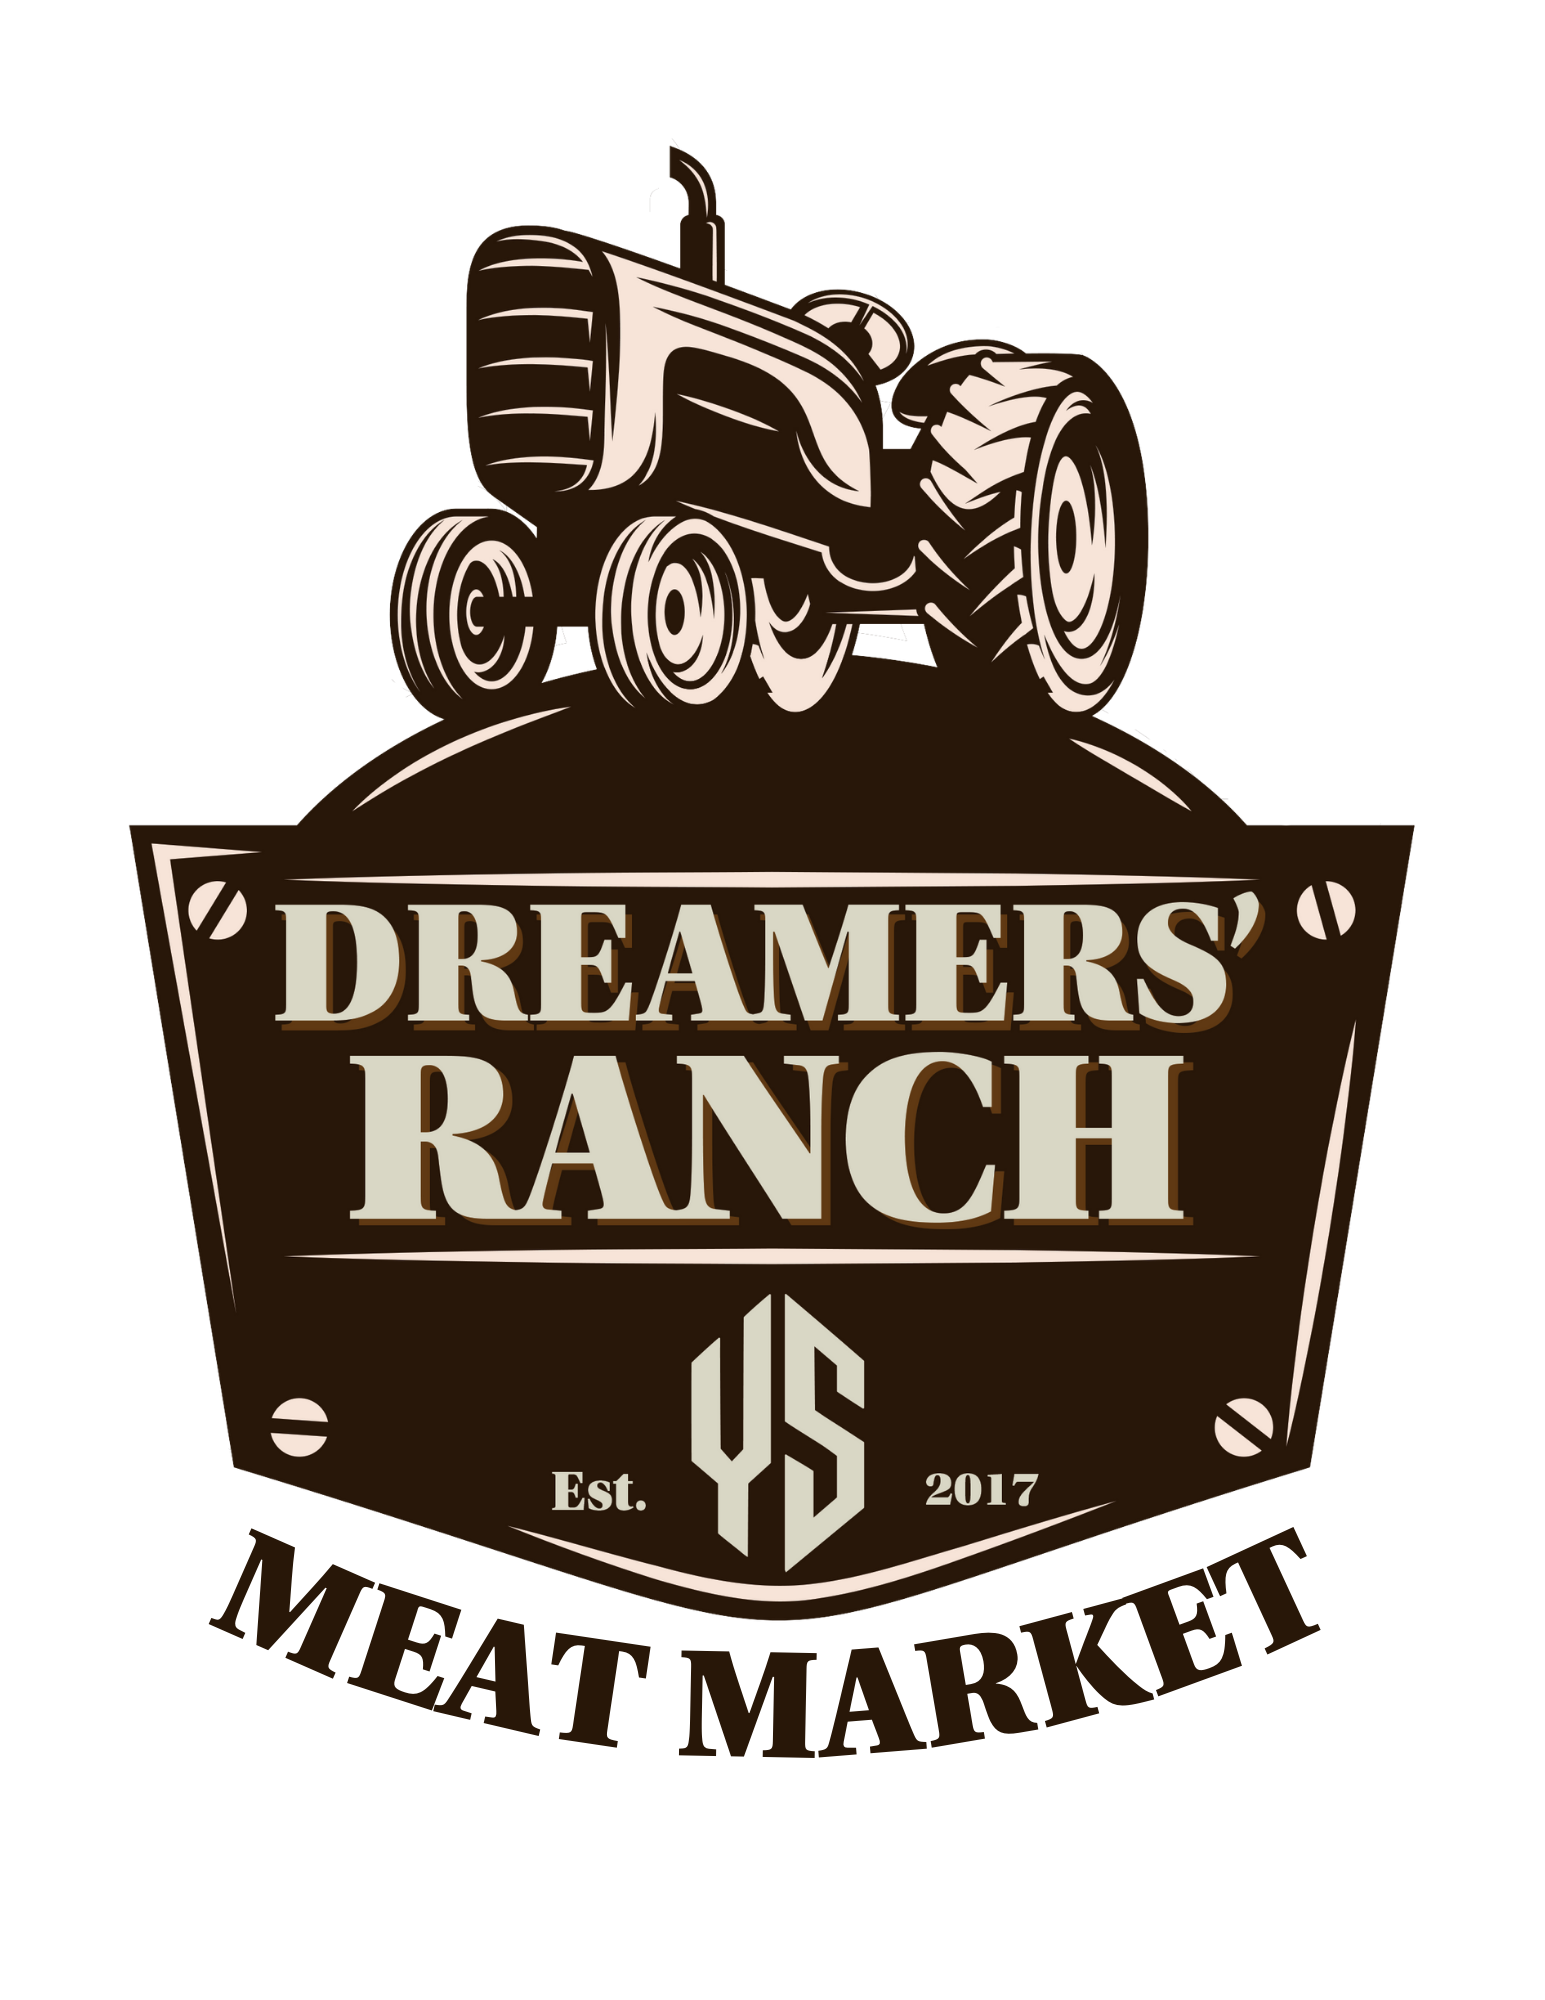 Dreamers' Ranch